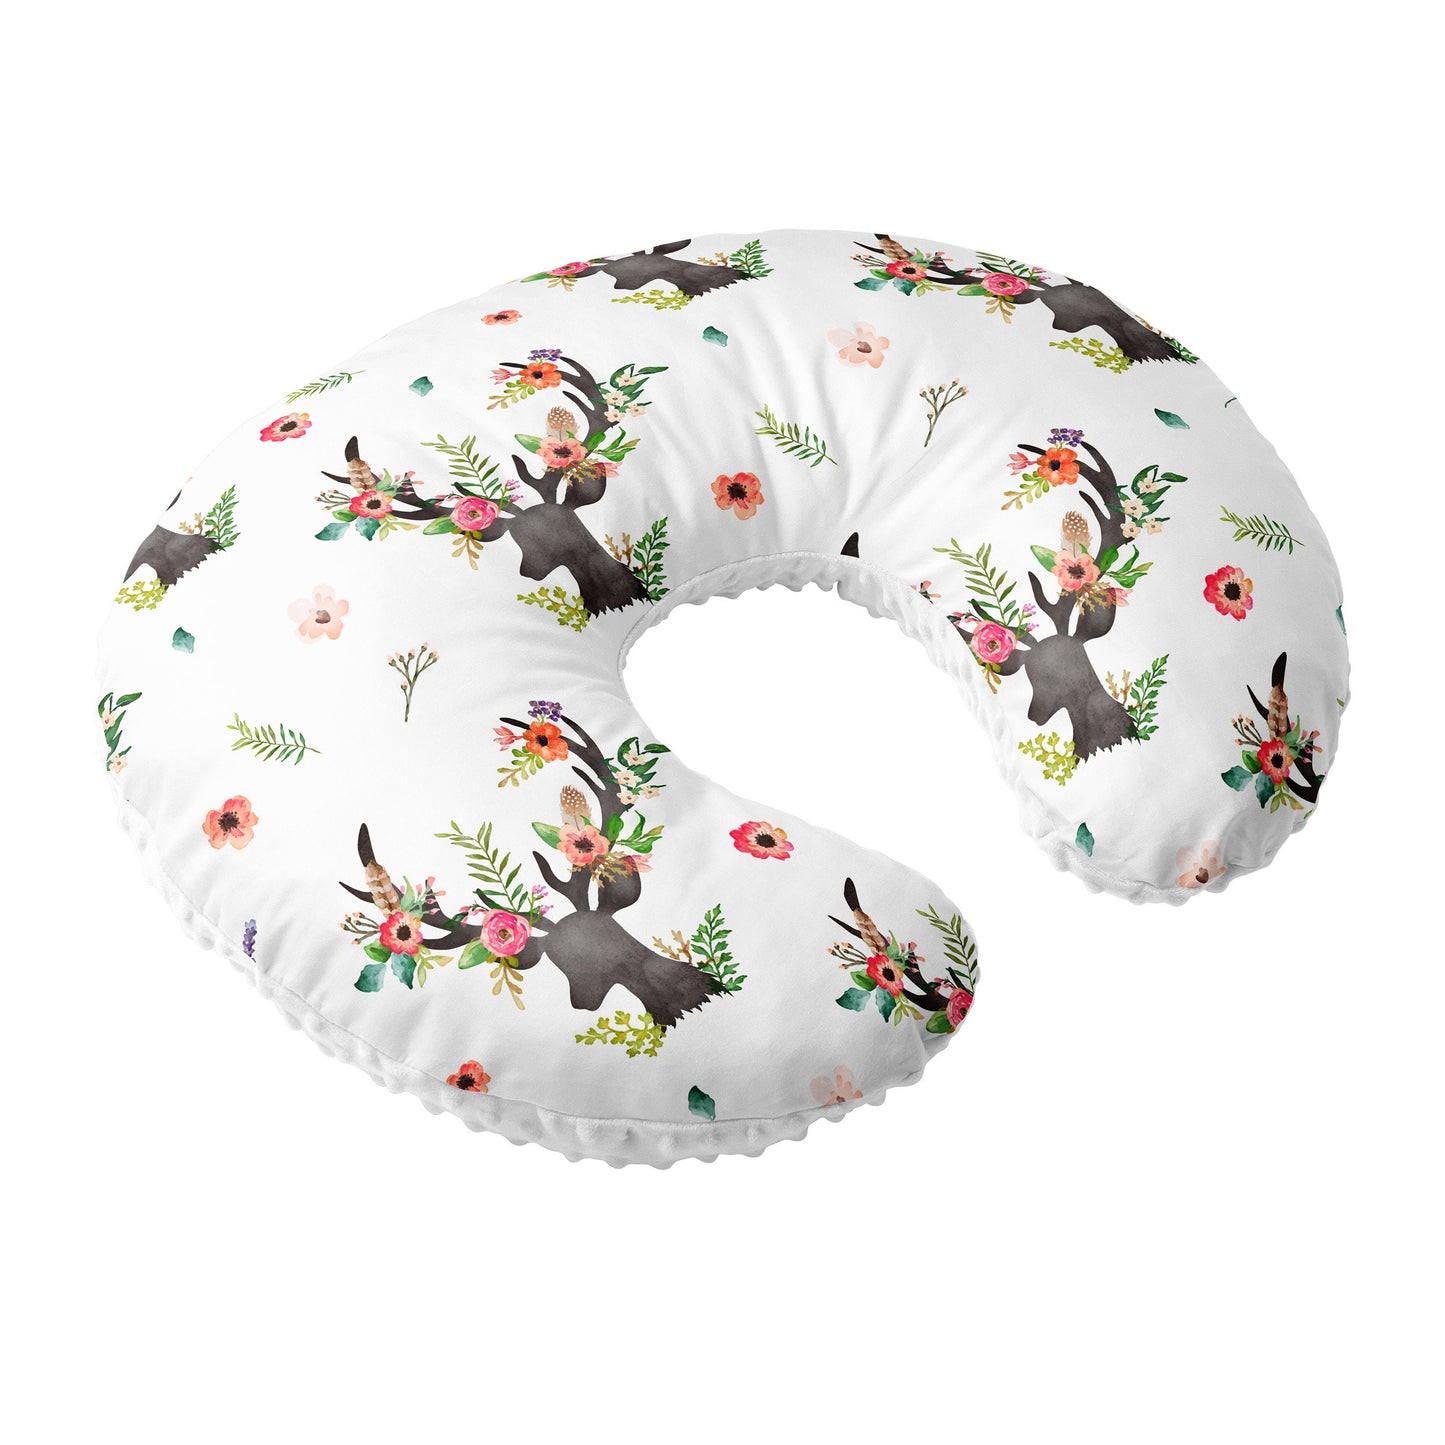 Nursing Pillow Cover, 100% Cotton ,  Slipcover Minky Boy Girl - Woodland Nursery Decor for Baby Boys and Girls Pillow Cover (Floral deer)